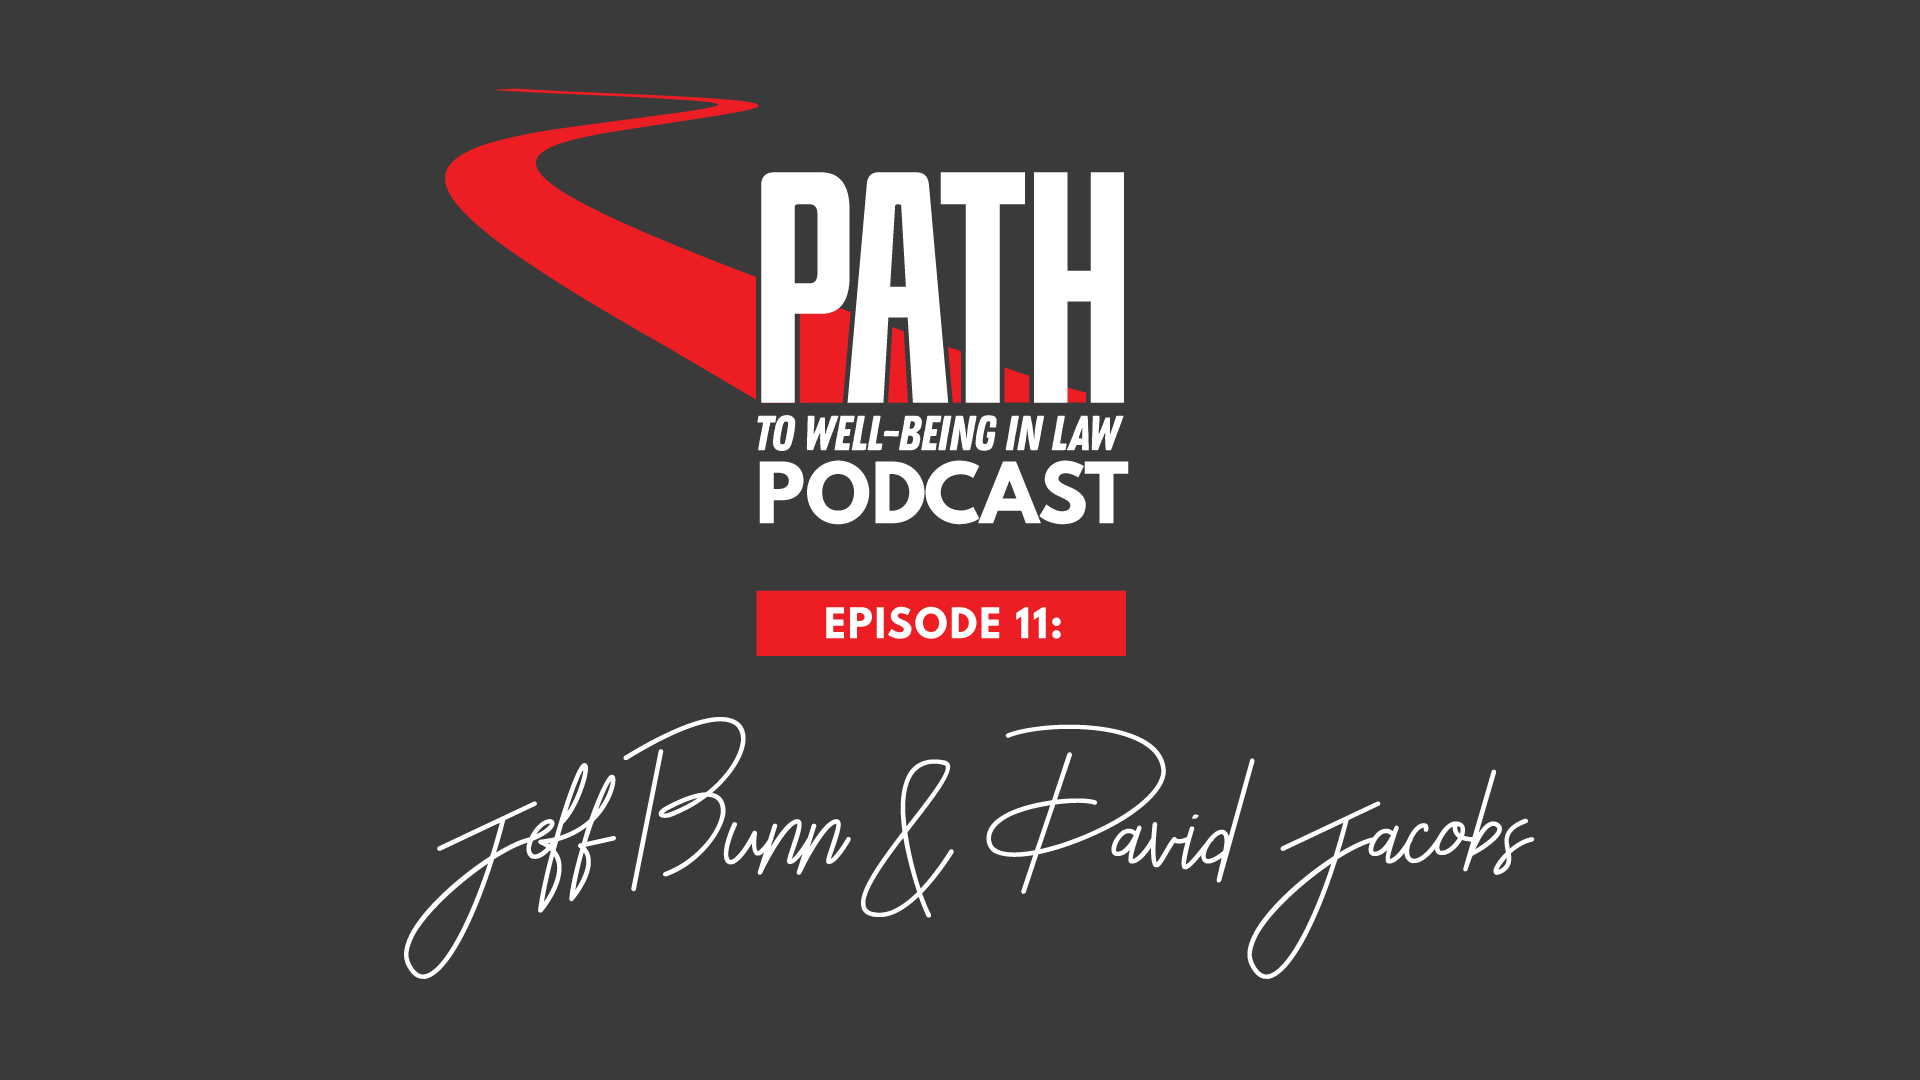 Path To Well-Being In Law Podcast: Episode 11 - David Jacobs & Jeff Bunn